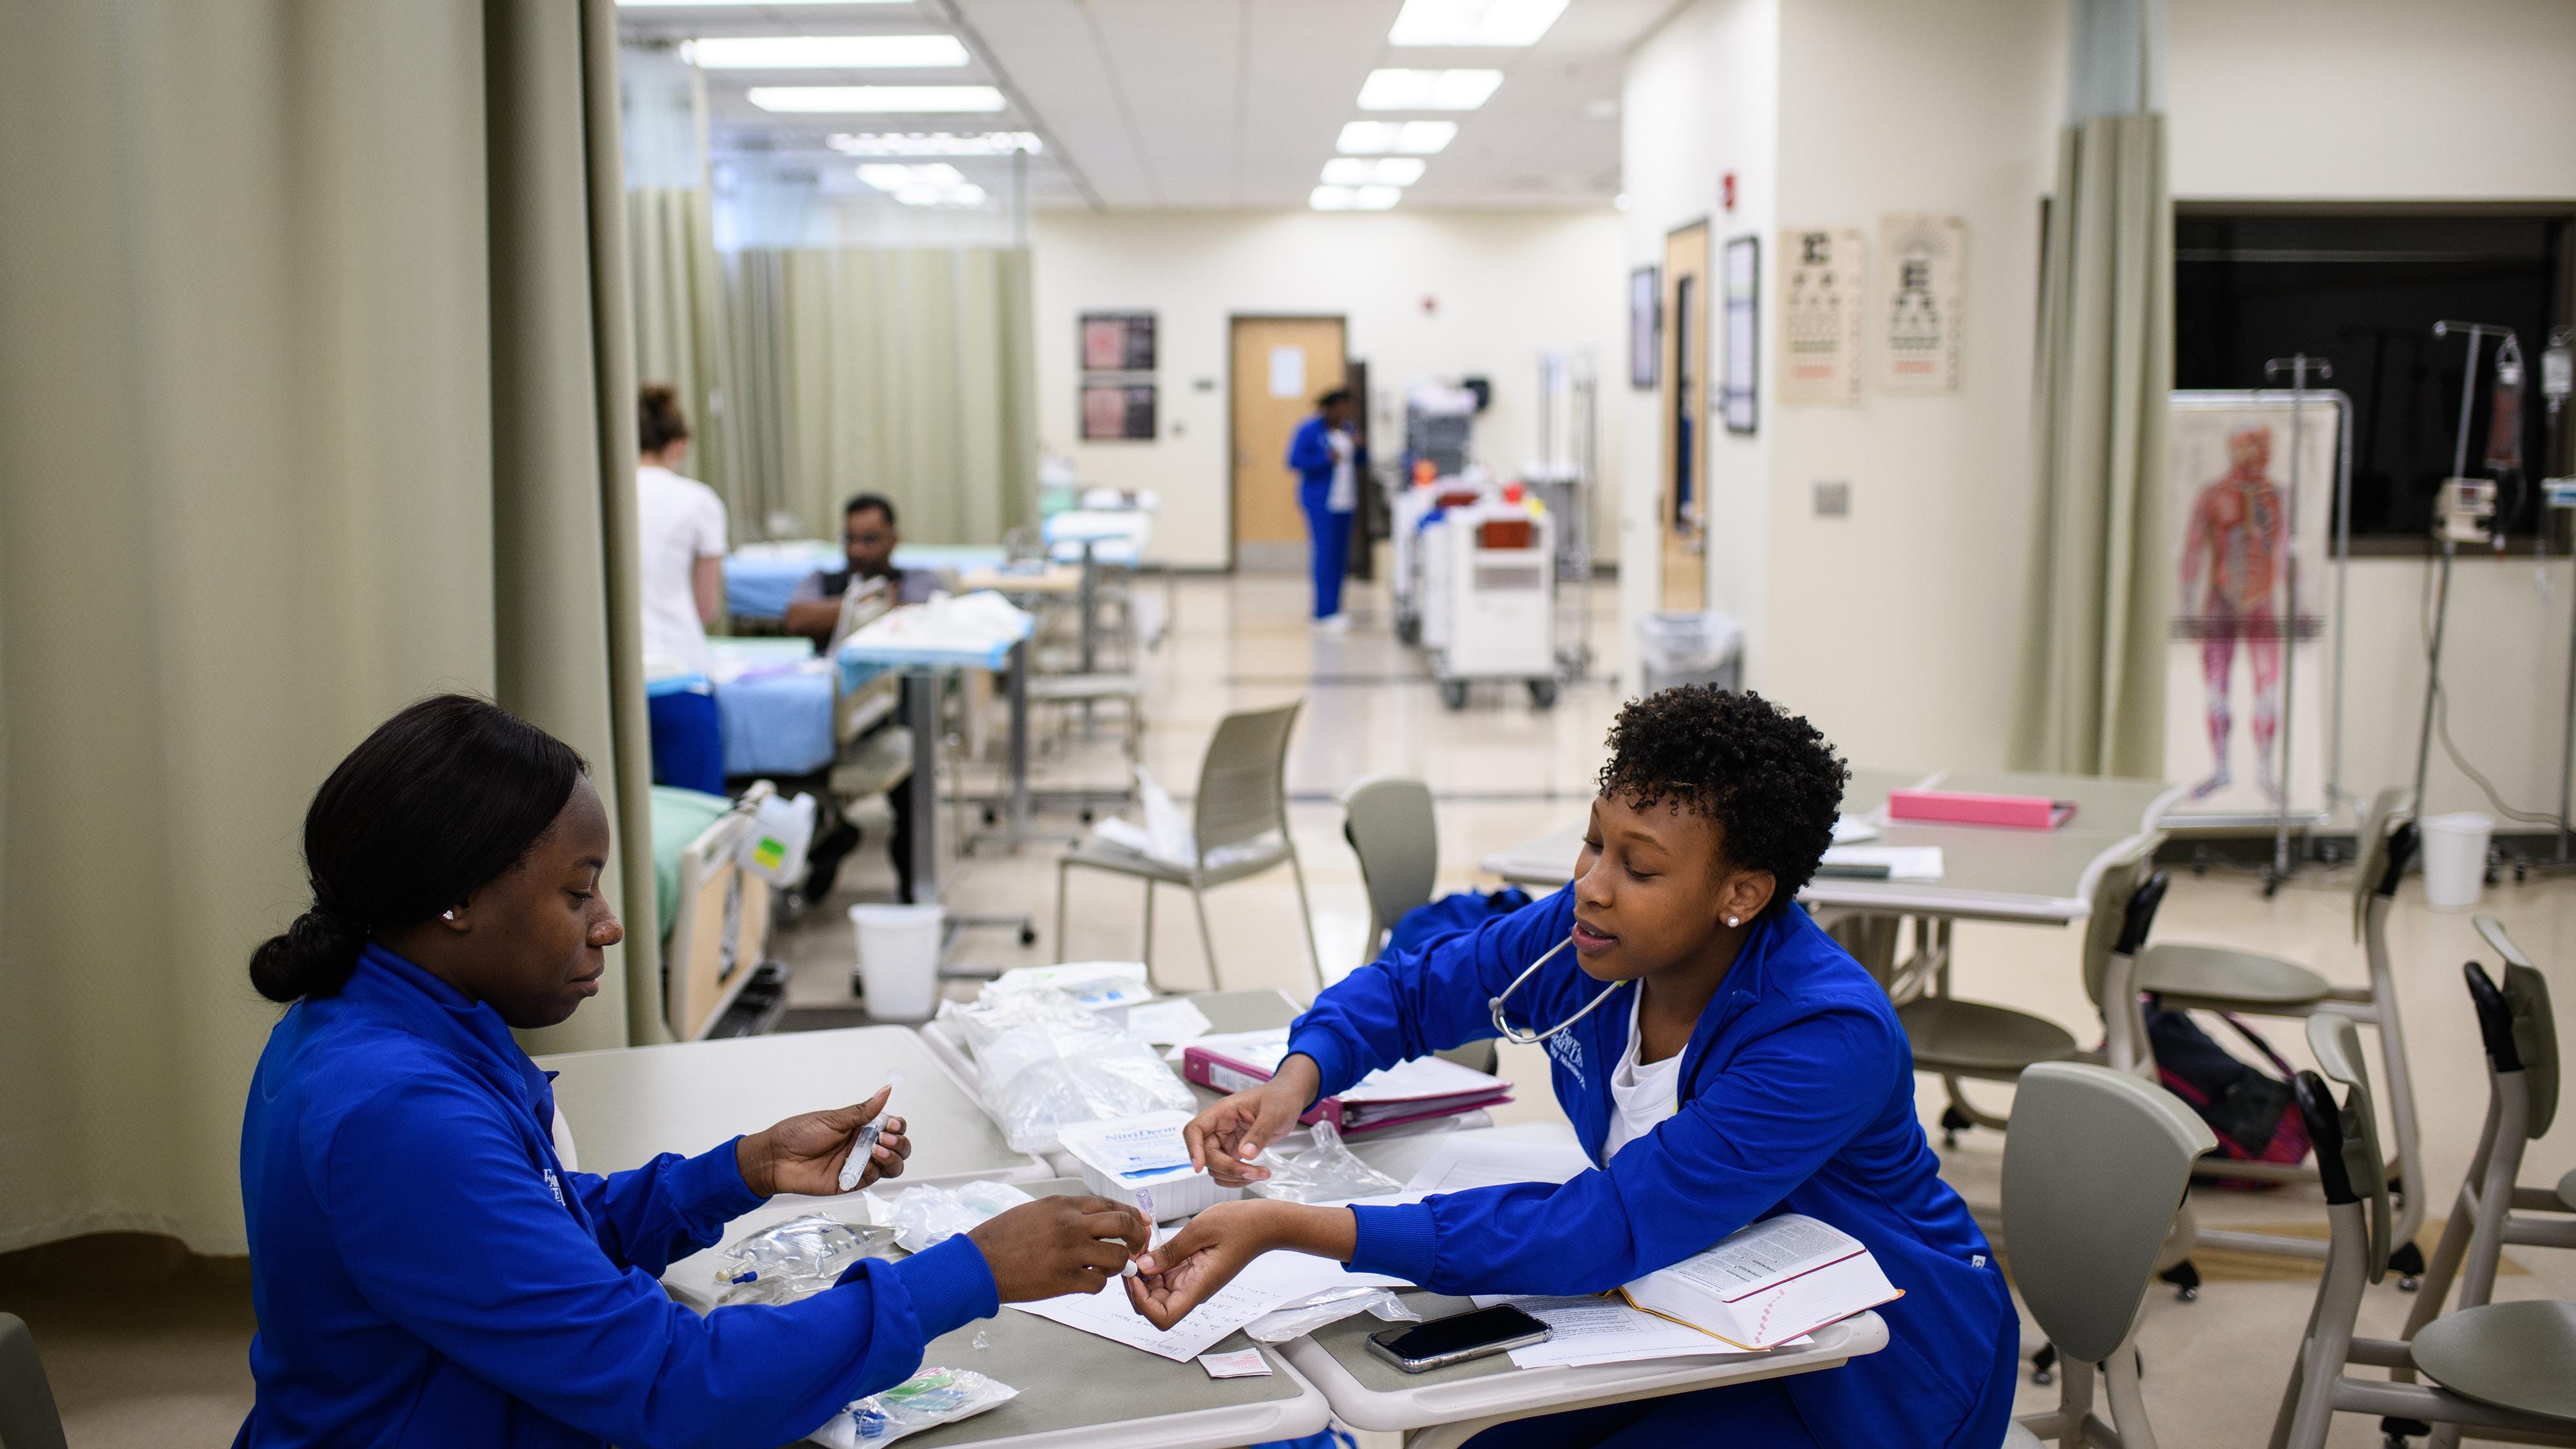 Fayetteville State University to offer master's degree in patient safety